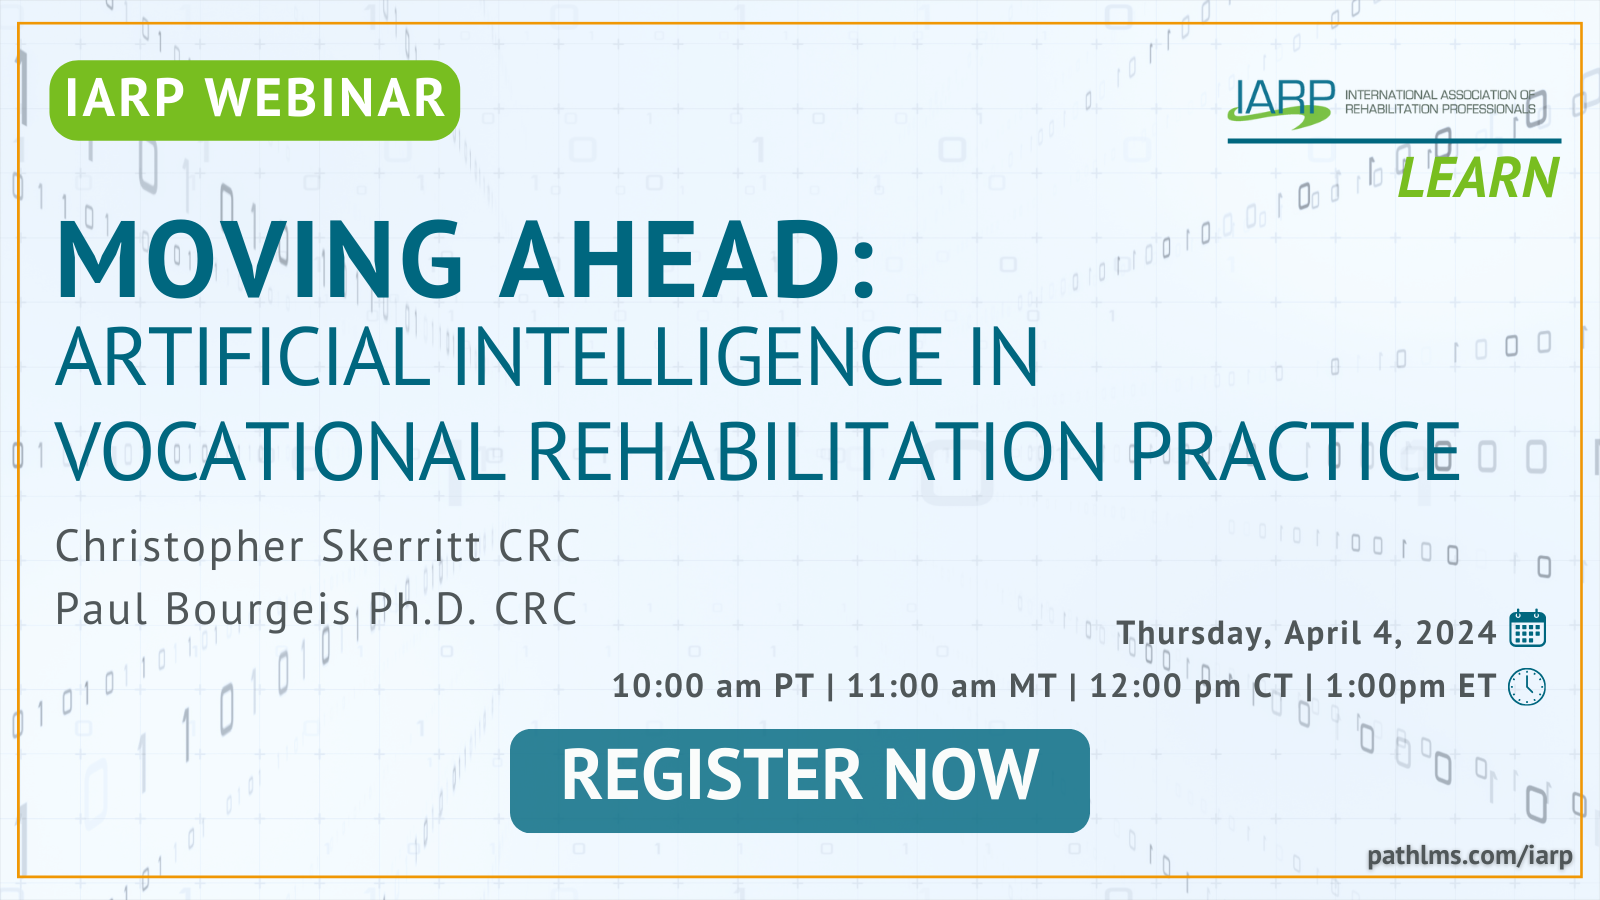 Moving Ahead: Artifical Intelligence in Vocational Rehabilitation Practice